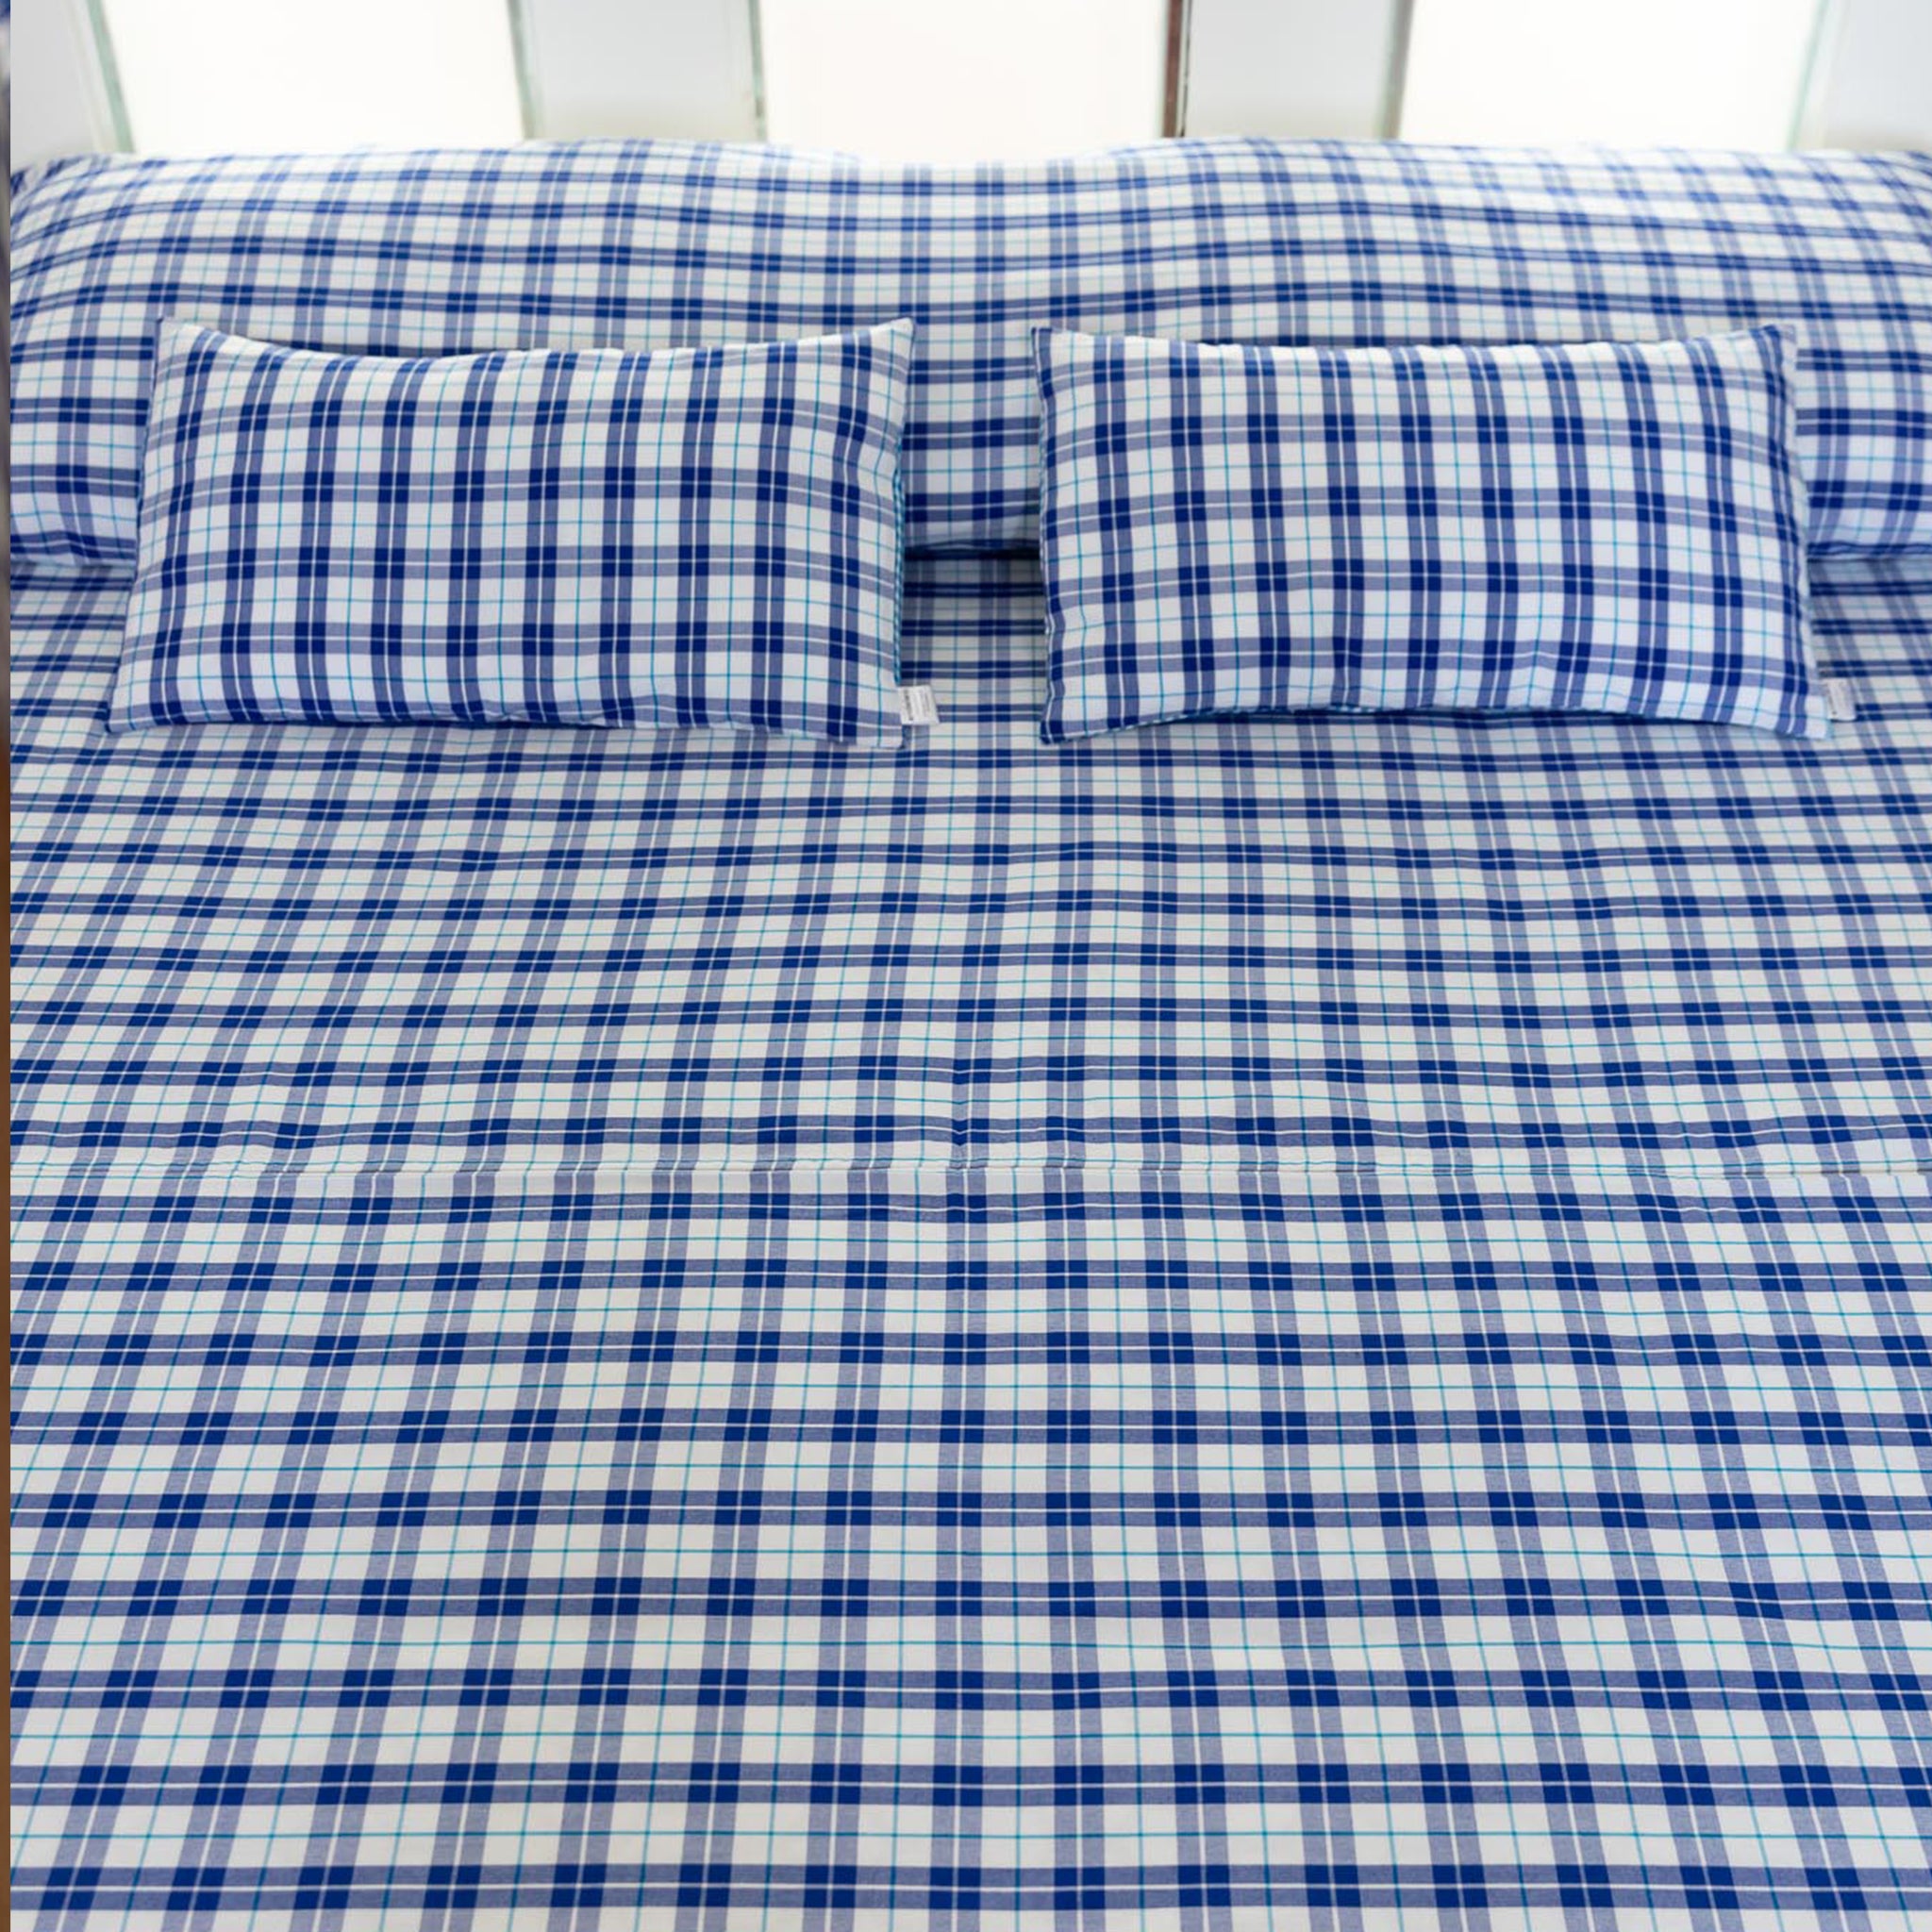 Double bed with Maasai checkered bedspread in blue&white and matching cushions